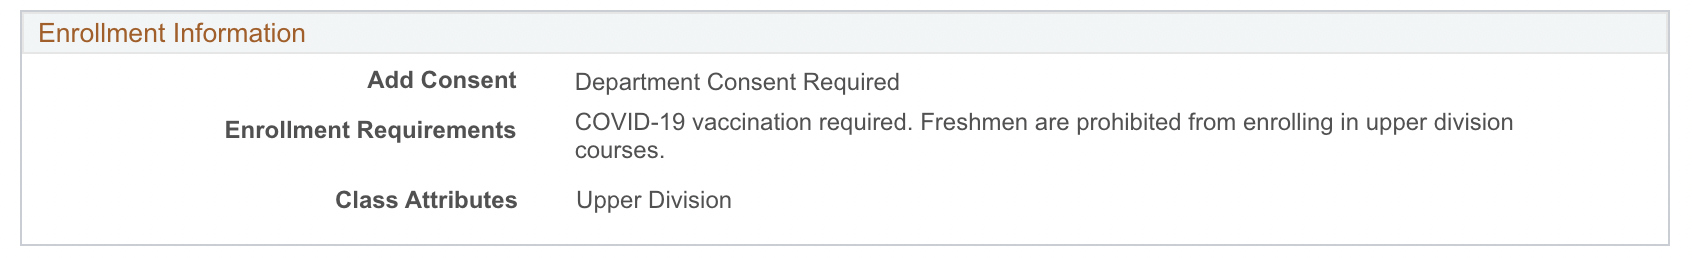 Enrollment Information screenshot in MyCSULB Student Center with Enrollment Requirements, "COVID-19 vaccination required" listed.